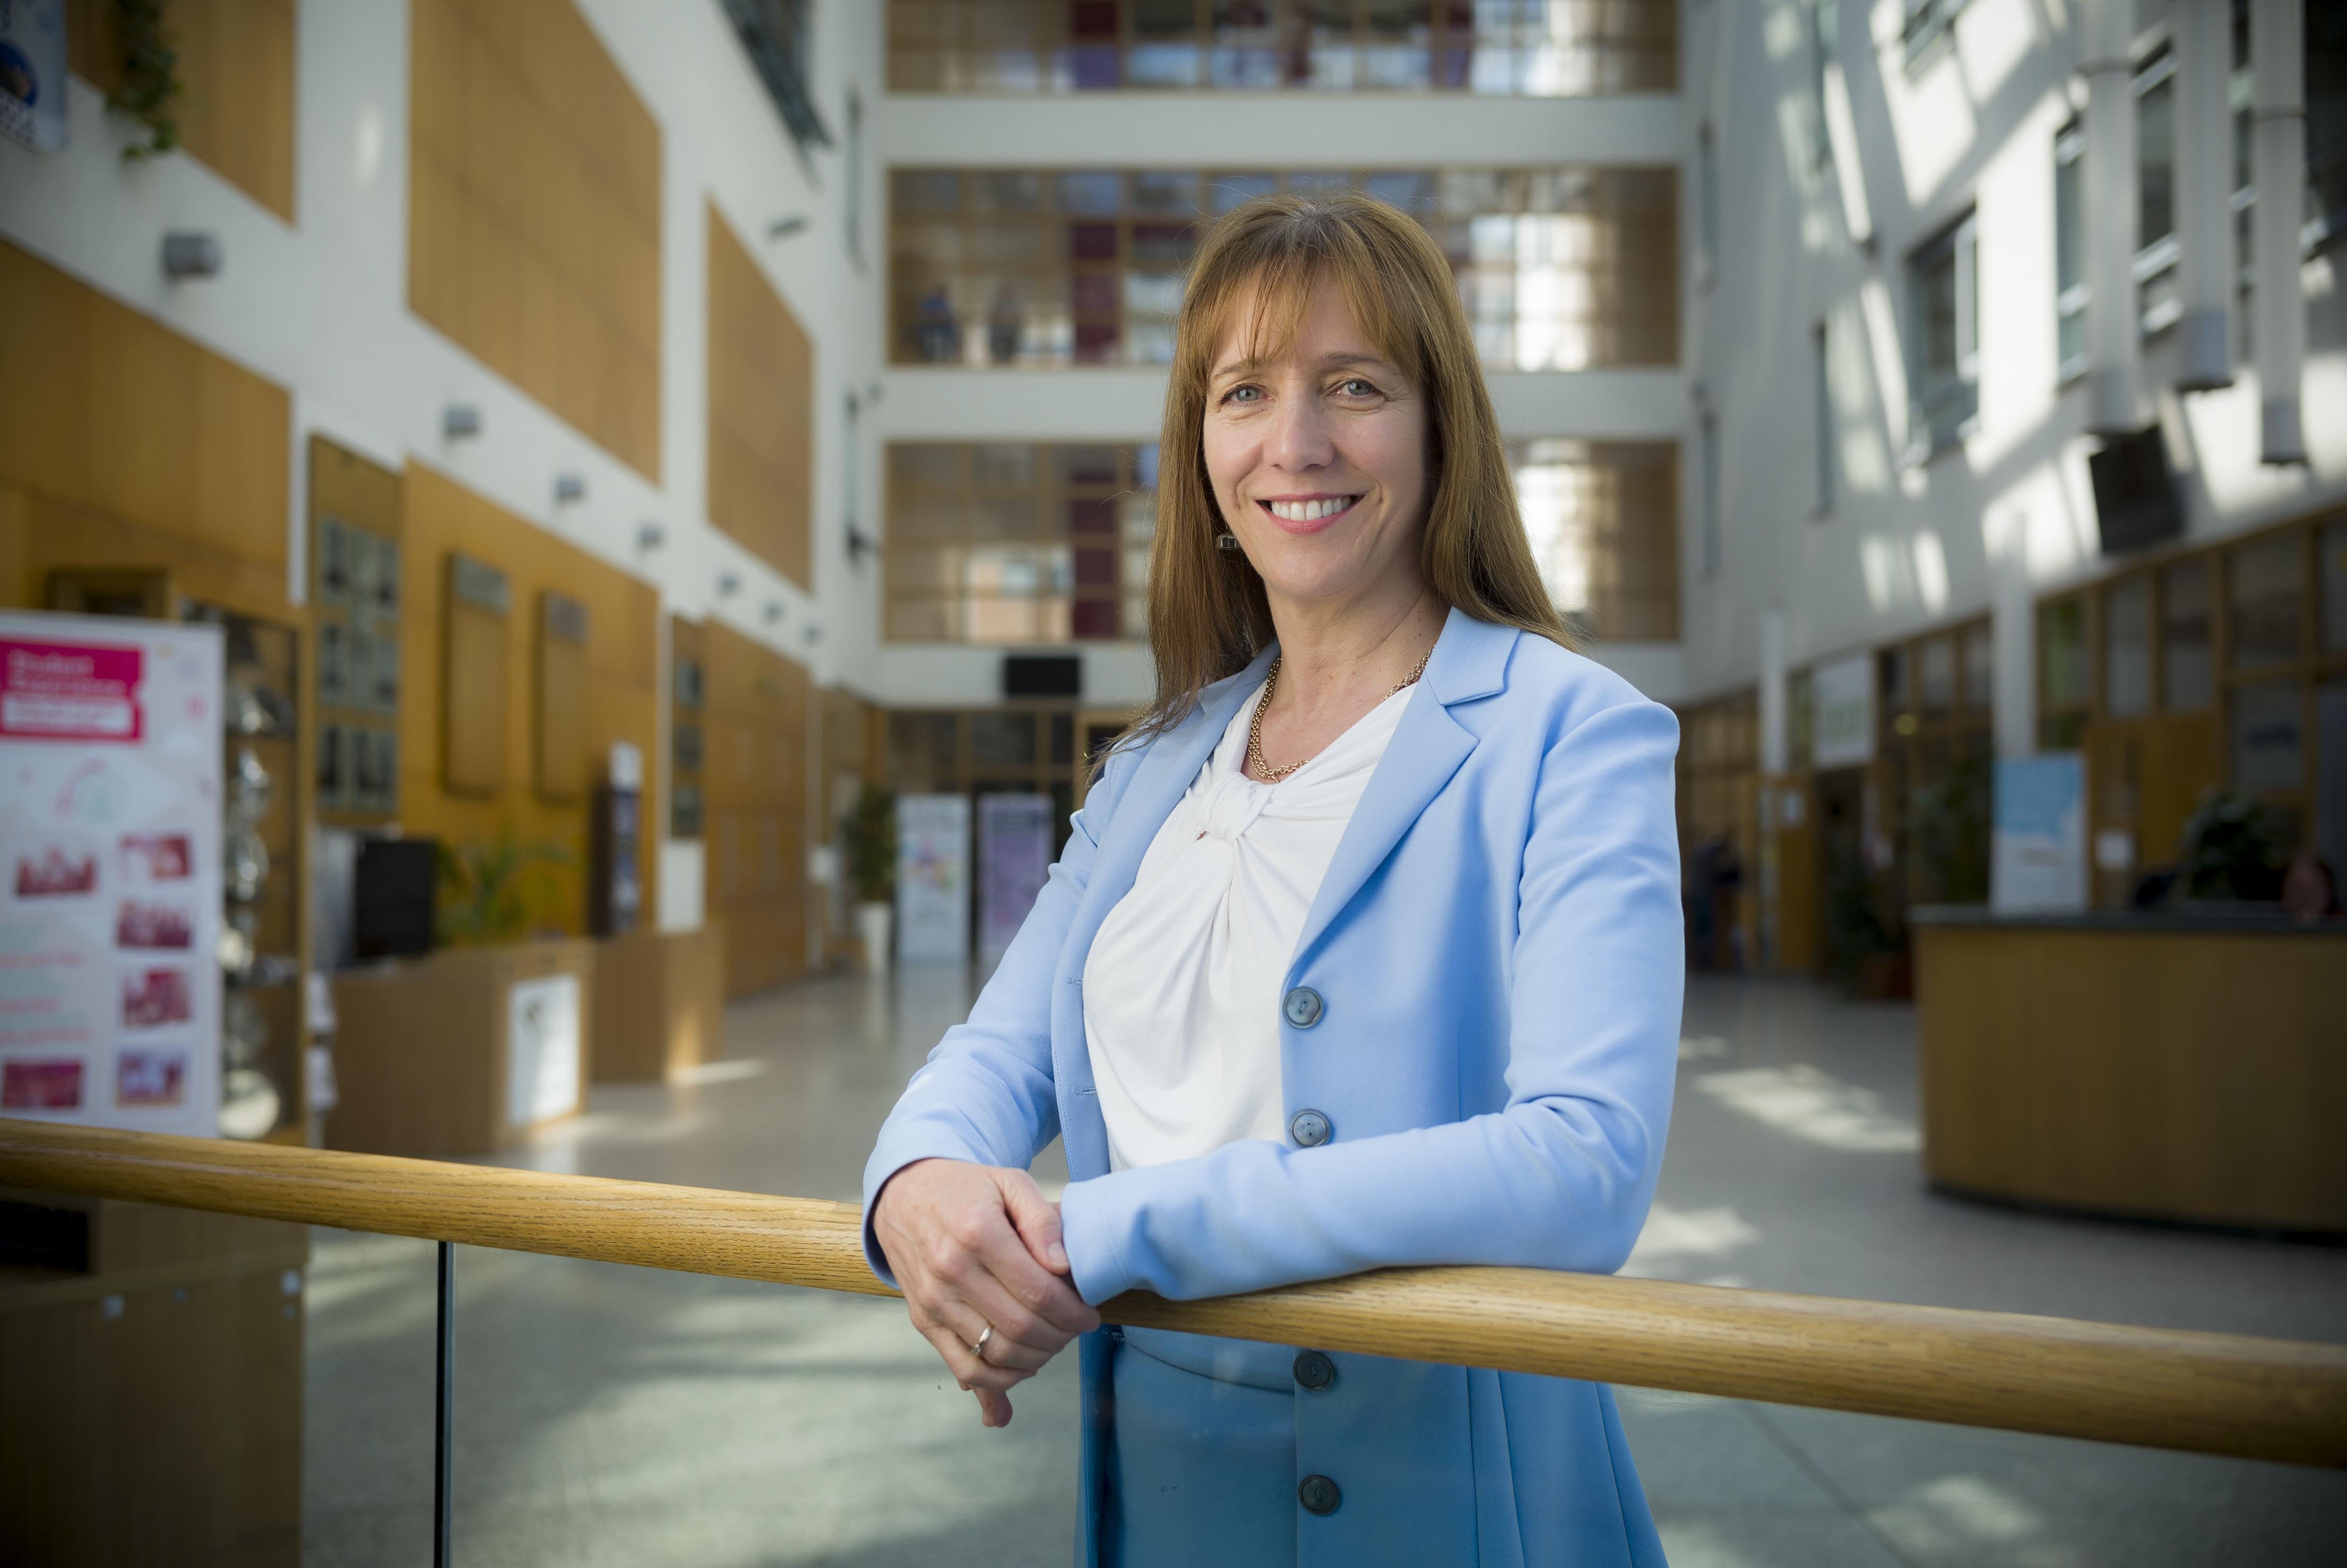 Appointment of New President of National College of Ireland